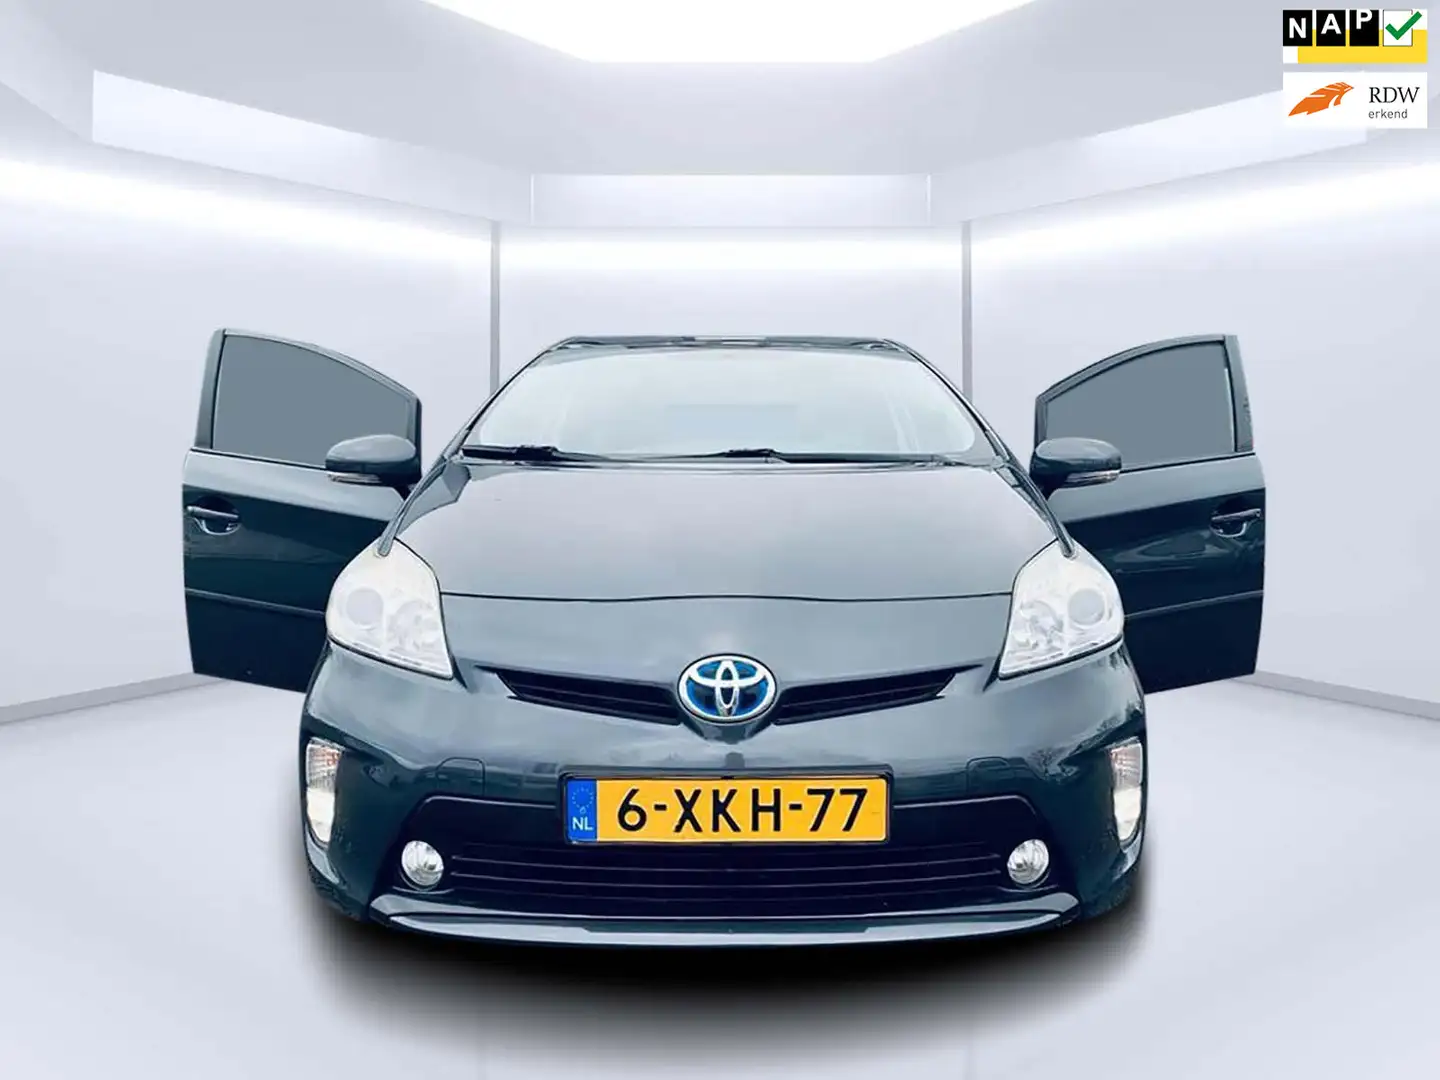 Toyota Prius 1.8 Comfort Top 5 edition, KM 77300 NAP, Cruise Co Gris - 1